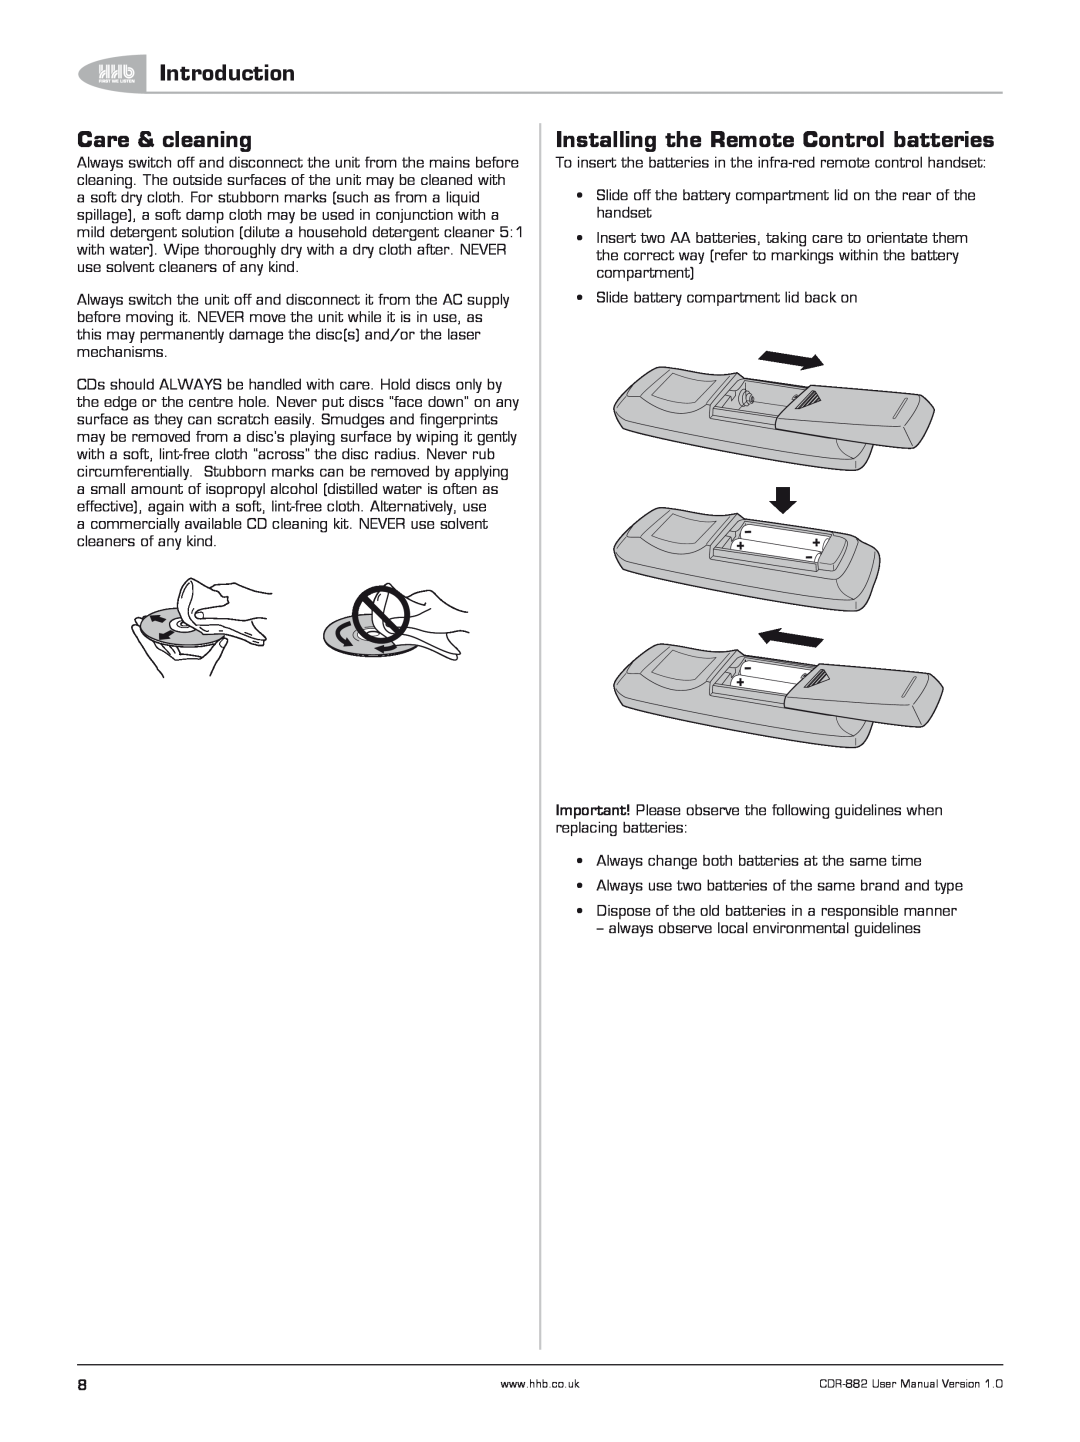 HHB comm CDR-882 user manual Care & cleaning, Installing the Remote Control batteries, Introduction 